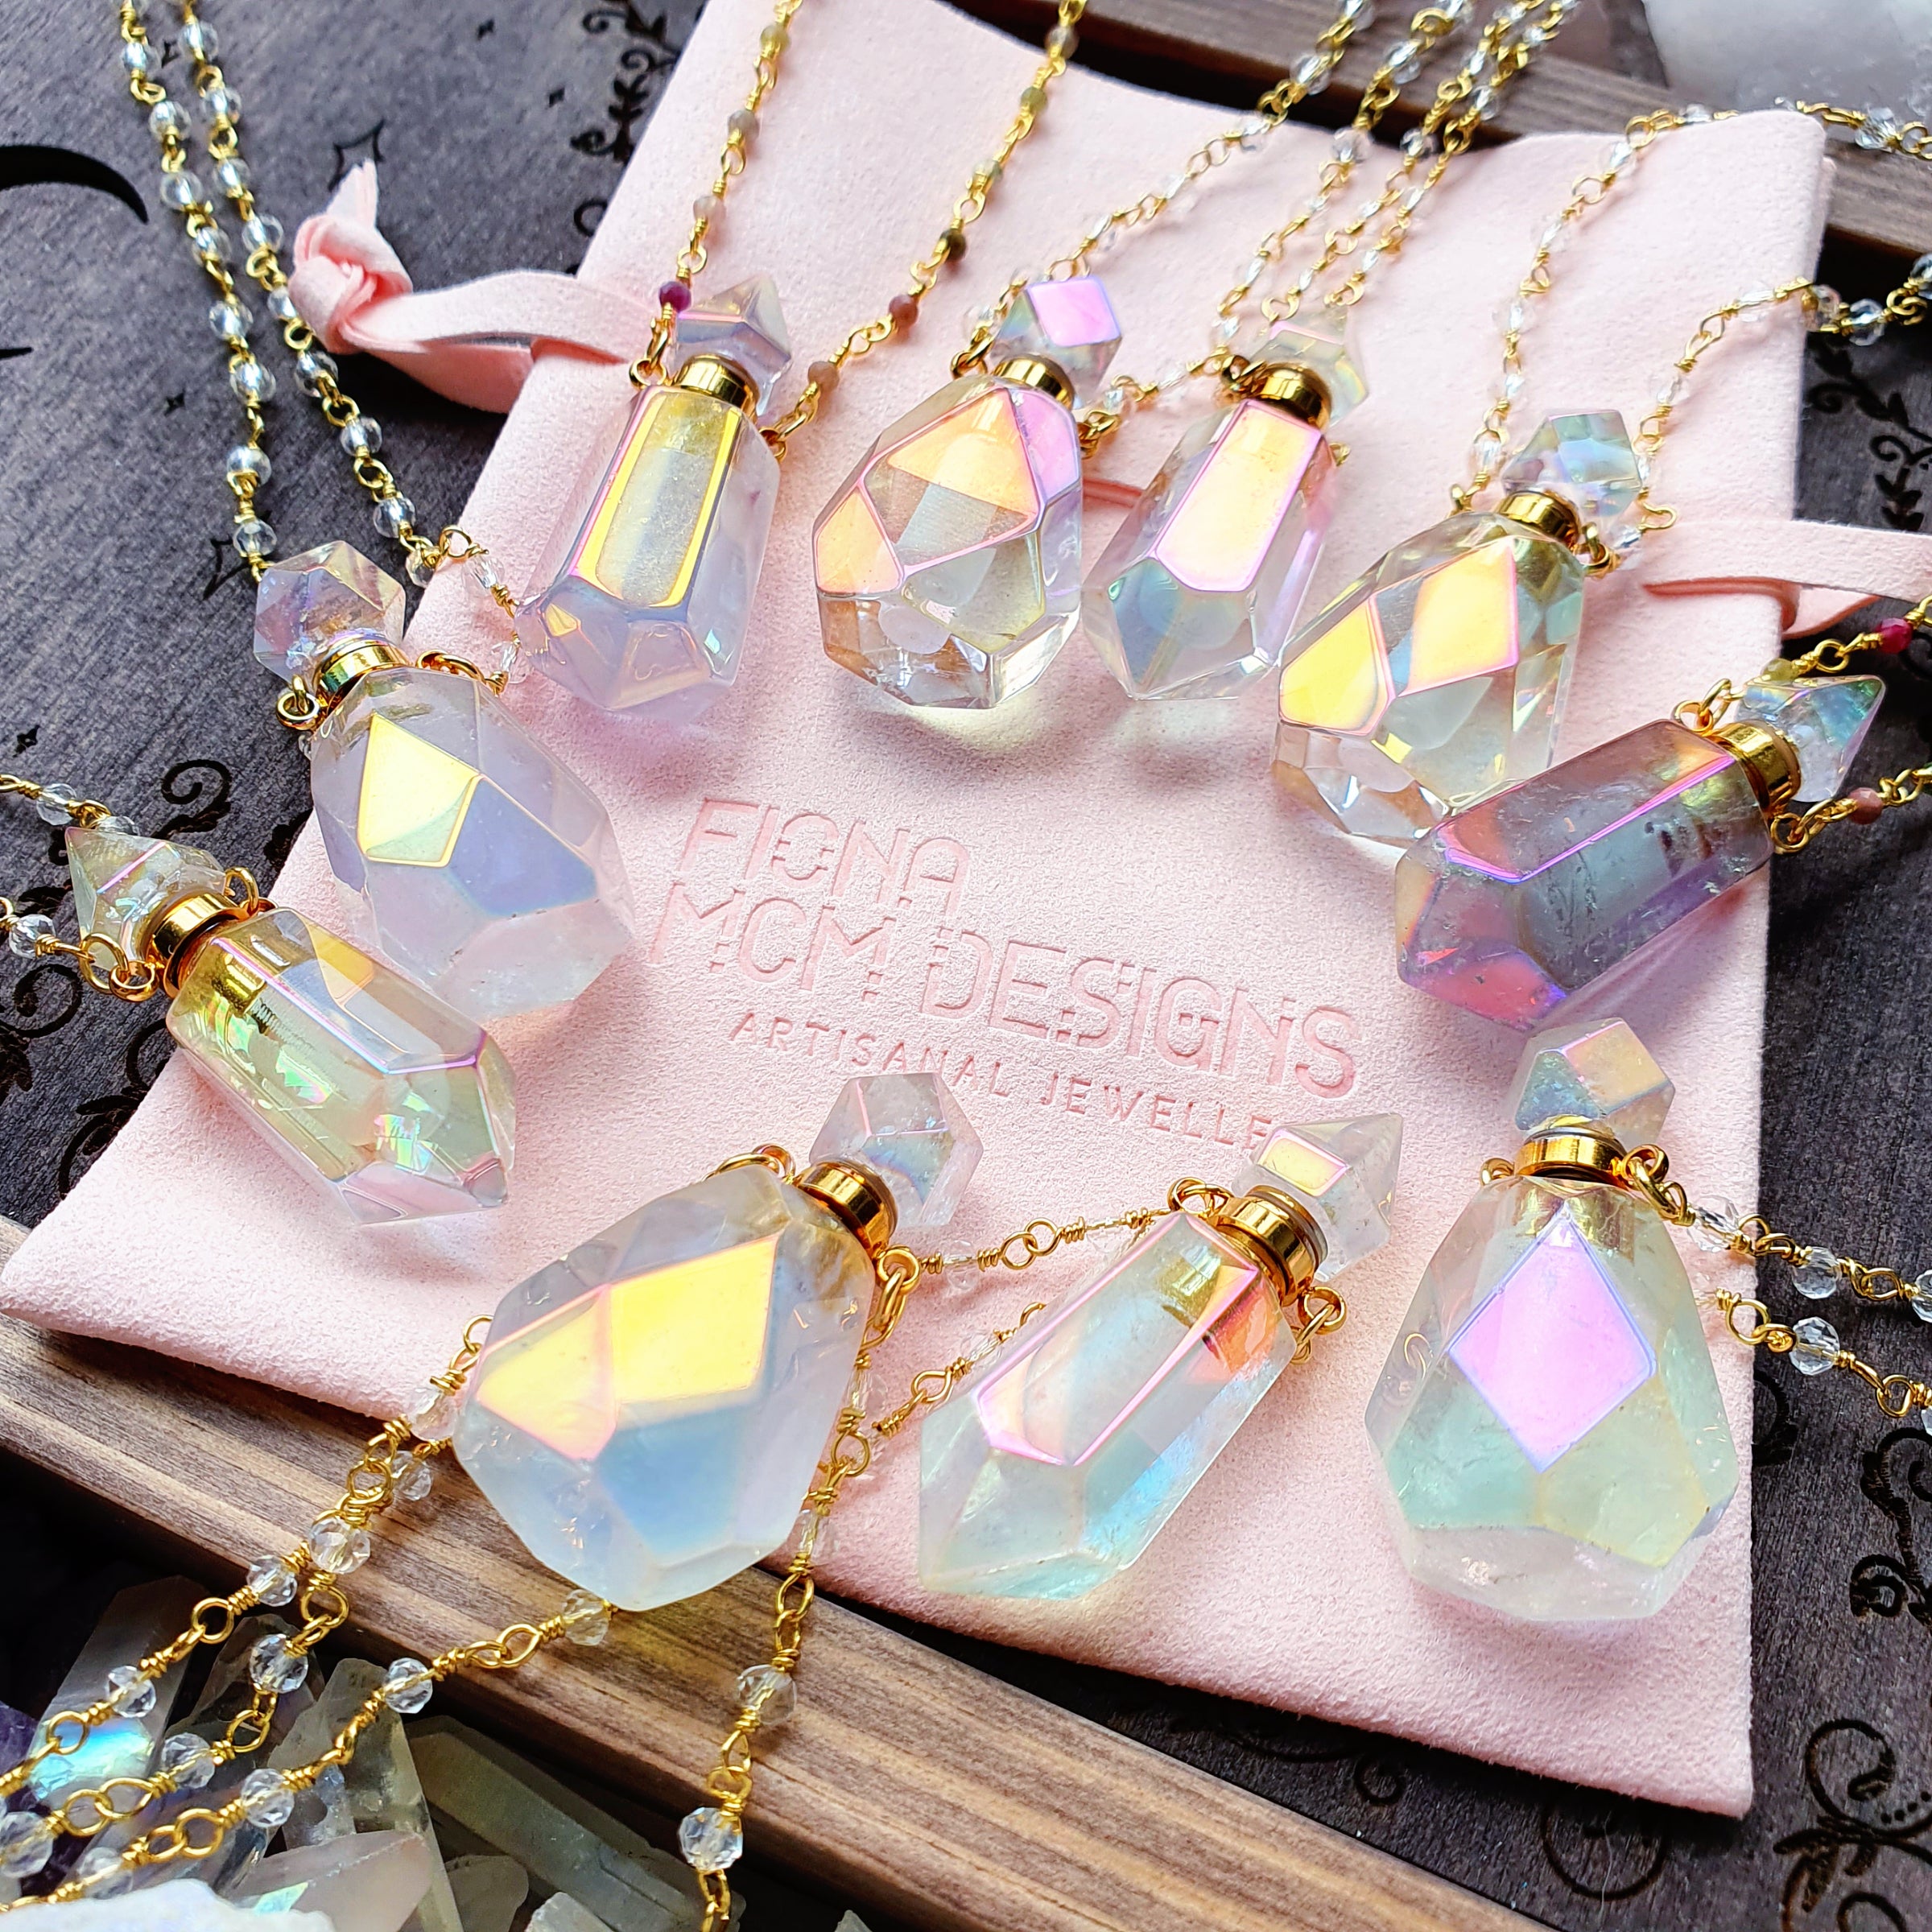 NM39977 Raw Clear Crystal Aqua Aura Quartz In Silver Plated Chain Jewelry  Statement Boho Chic Necklace For Women - AliExpress